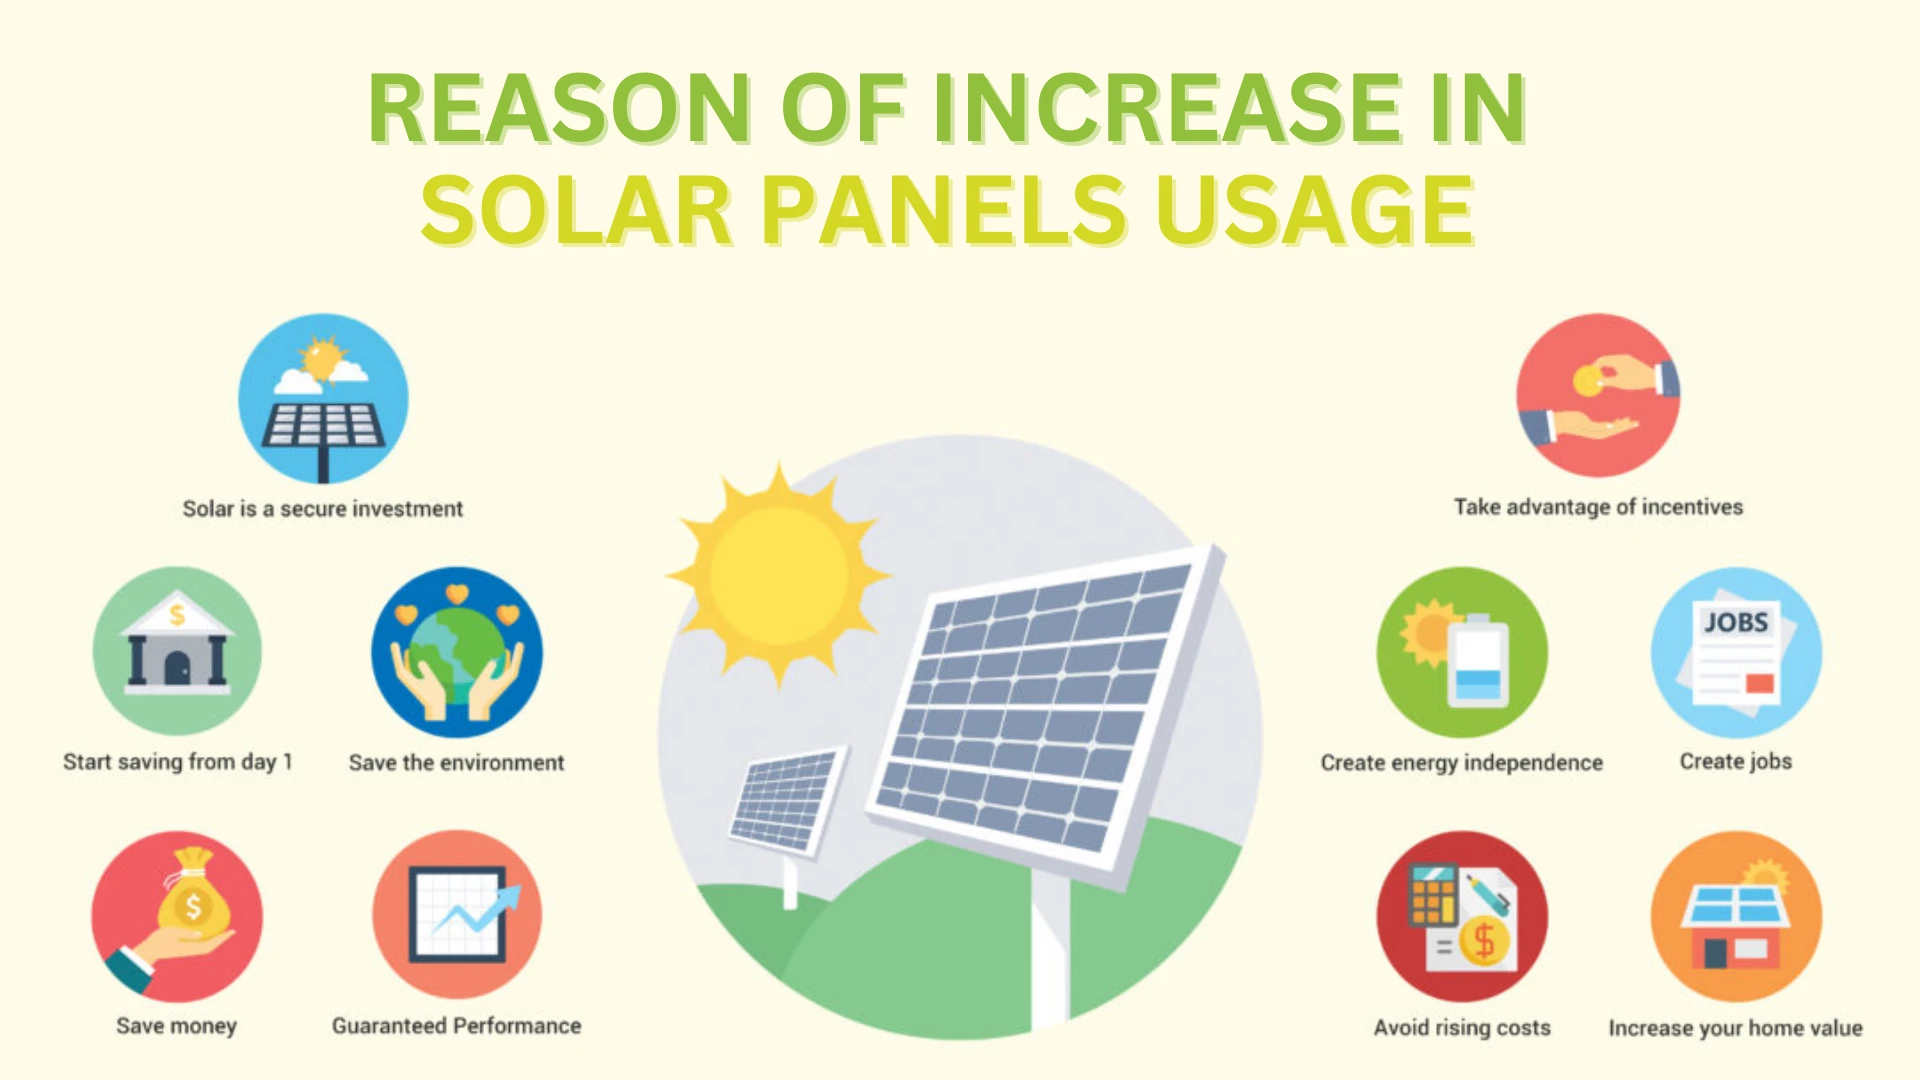 Reason of Increase in Solar Panels Usage